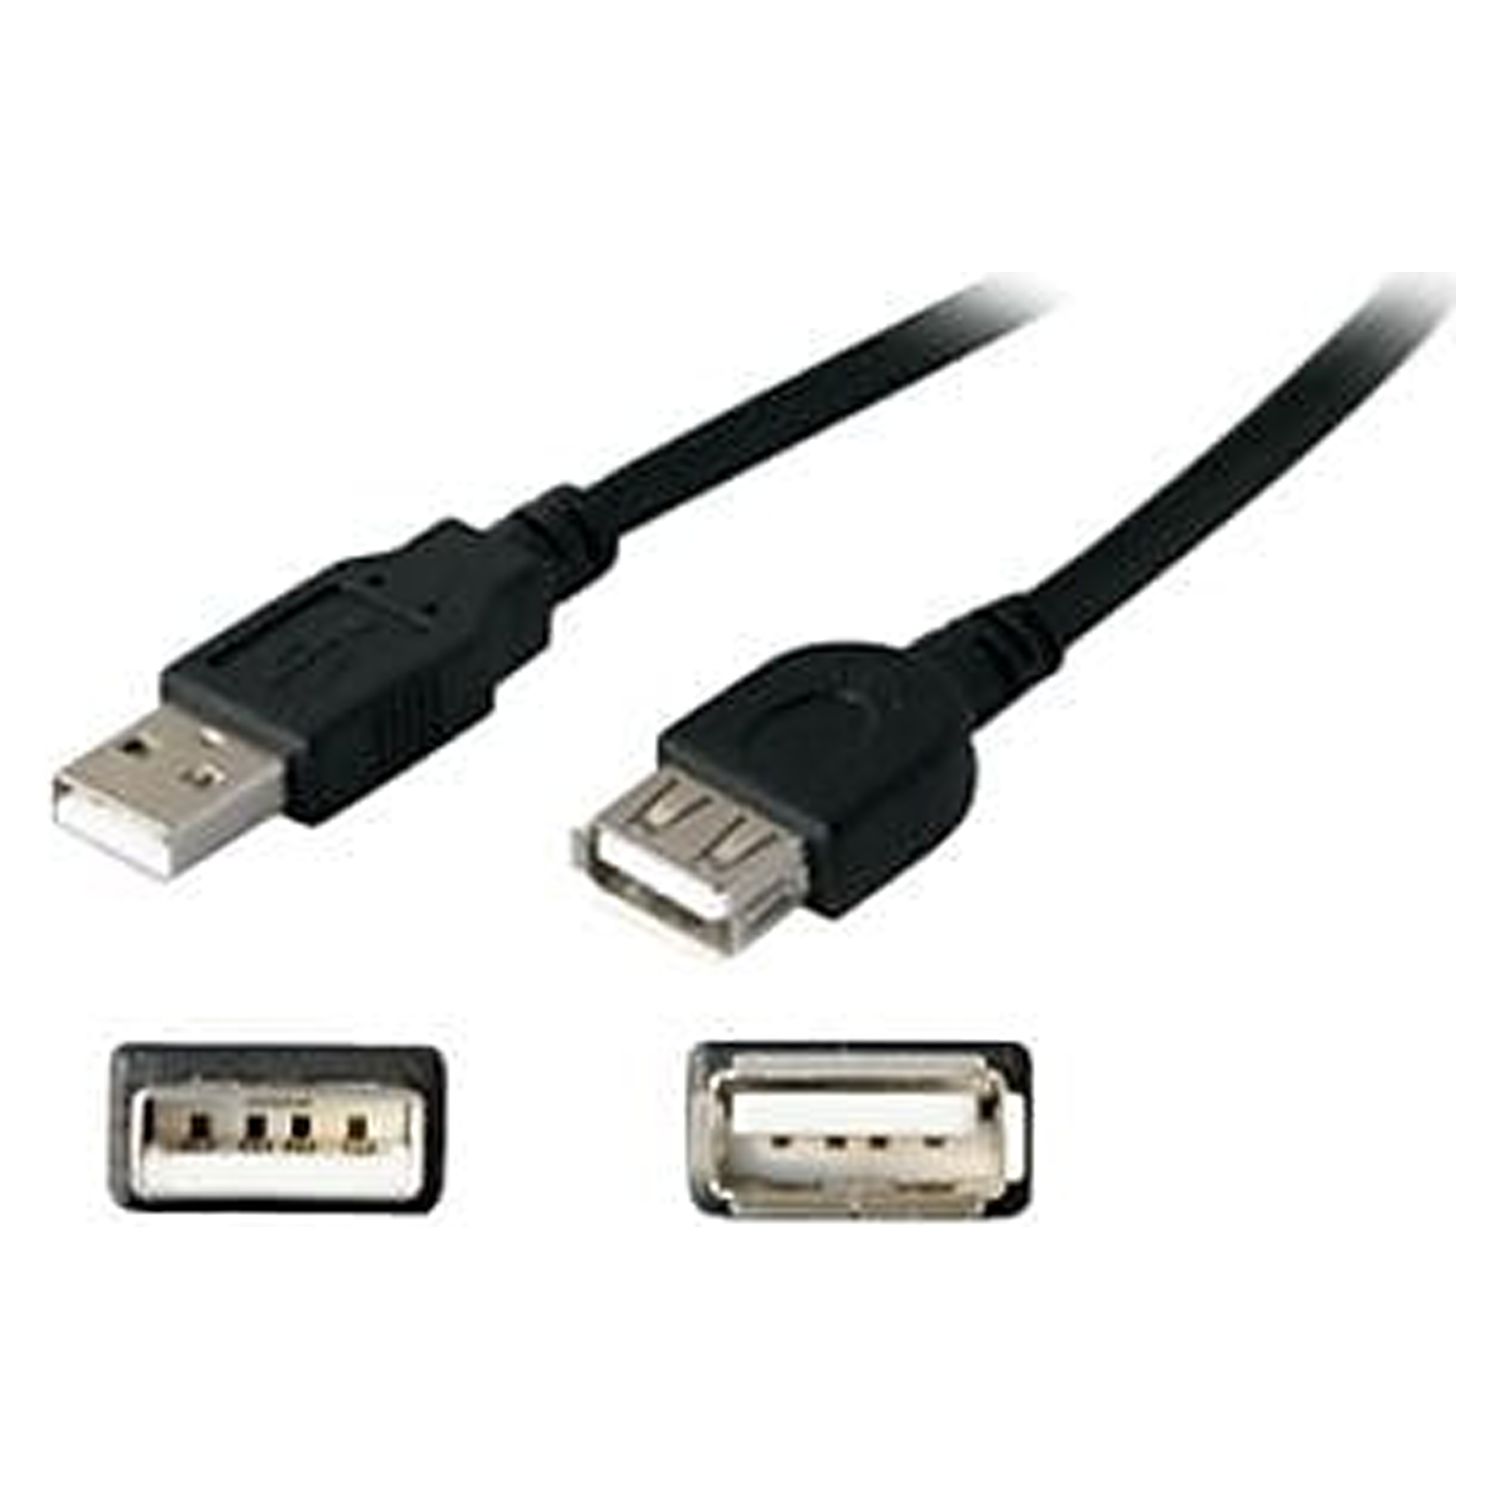 AddOn 15.0ft USB 2.0 (A) to USB 2.0 (A) Extension Cable - USB extension cable - 15 ft - image 2 of 2